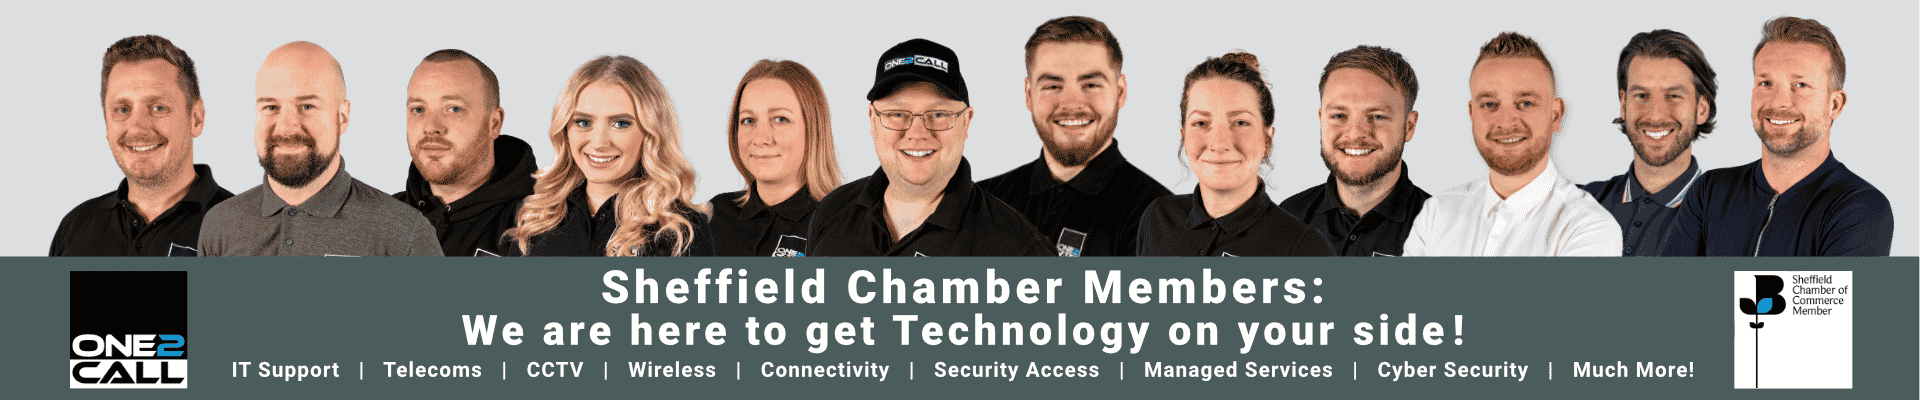 Sheffield Chamber Members: We are here to get Technology on your side!